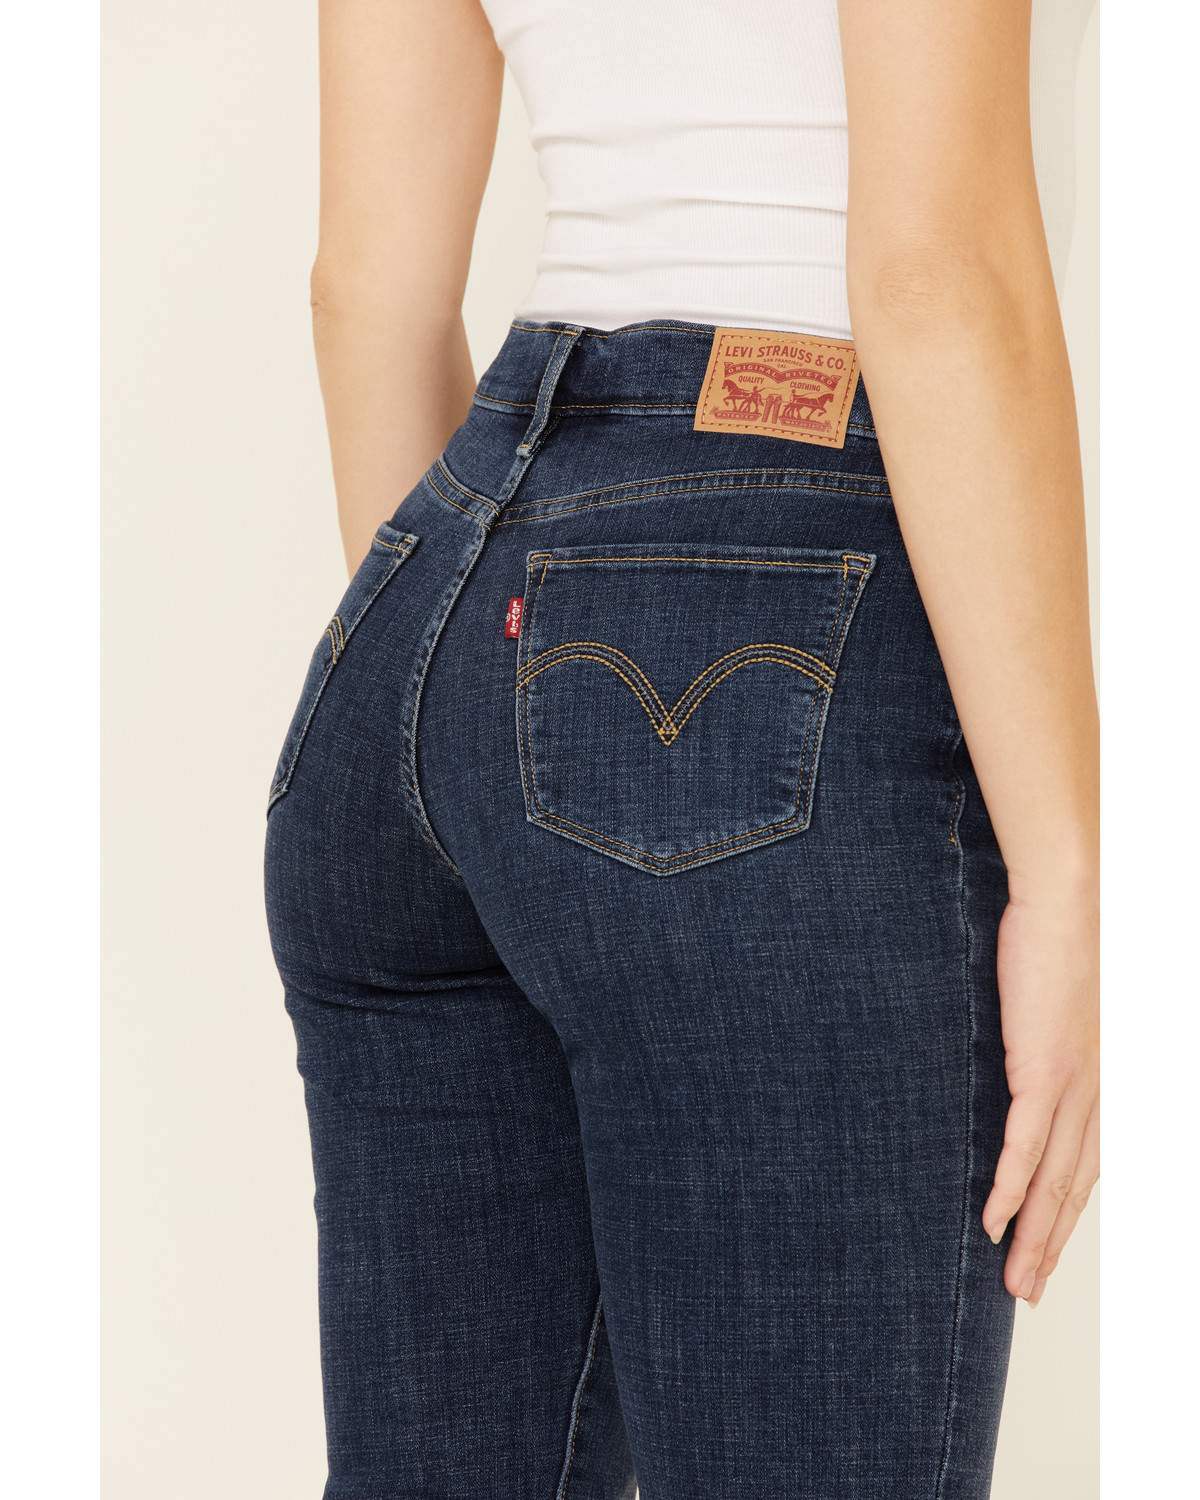 Levis Womens Classic Straight Mid Rise Maui Waterfall Jeans Sheplers 